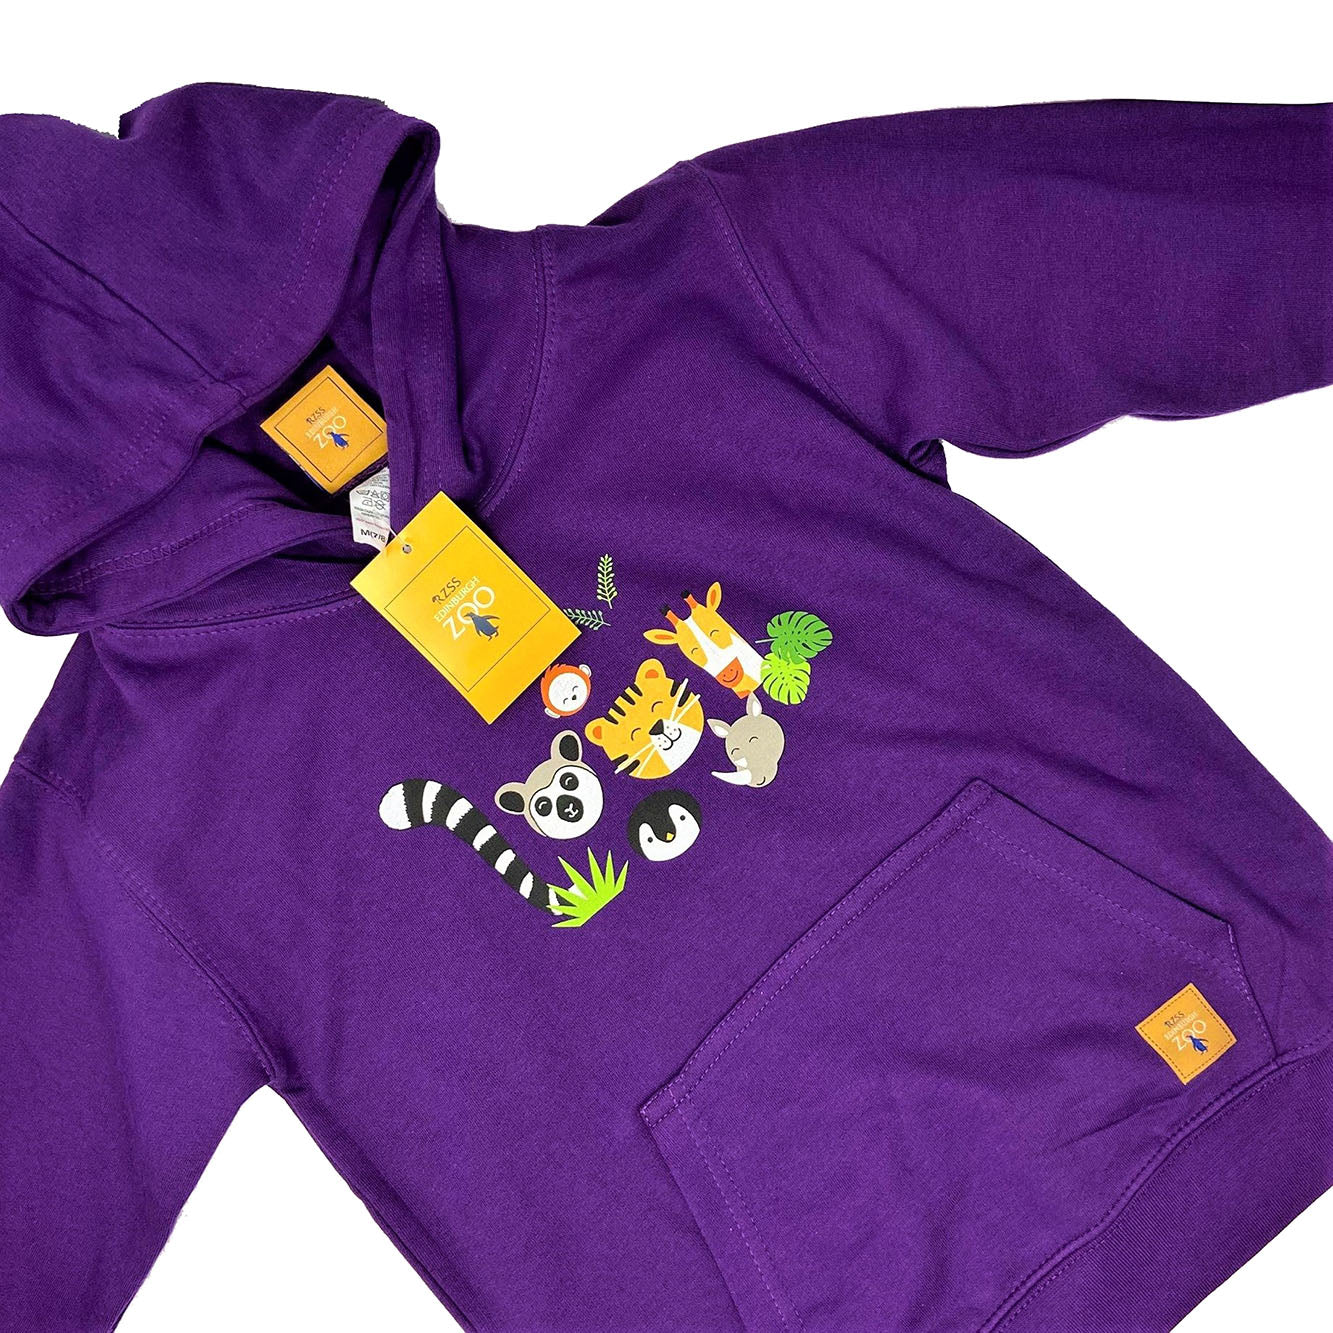 Bespoke Edinburgh Zoo design hoodie featuring animal faces from some popular Zoo residents!   Cotton hoodie in purple. 